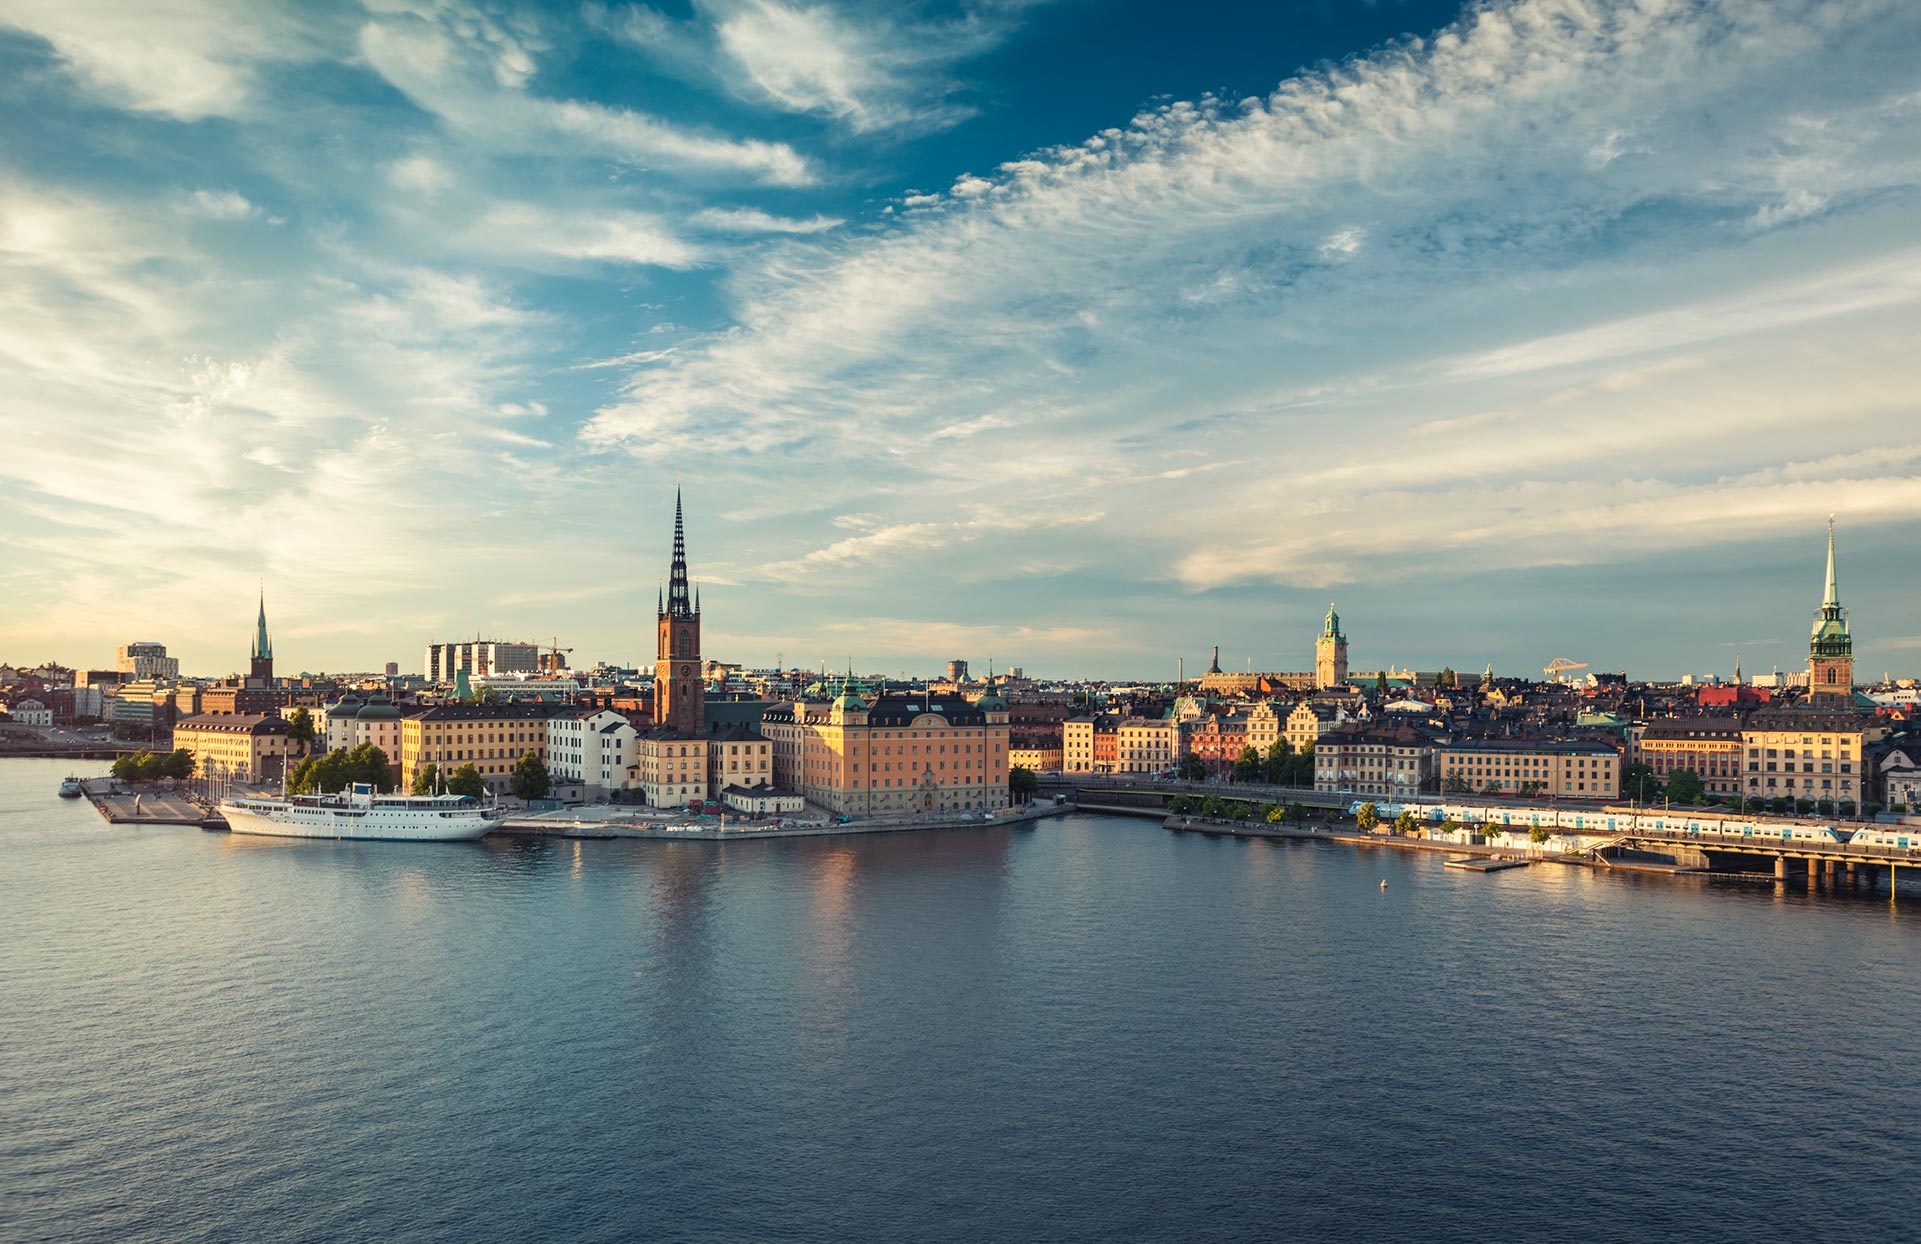 Confluence partners with Sweden Limina